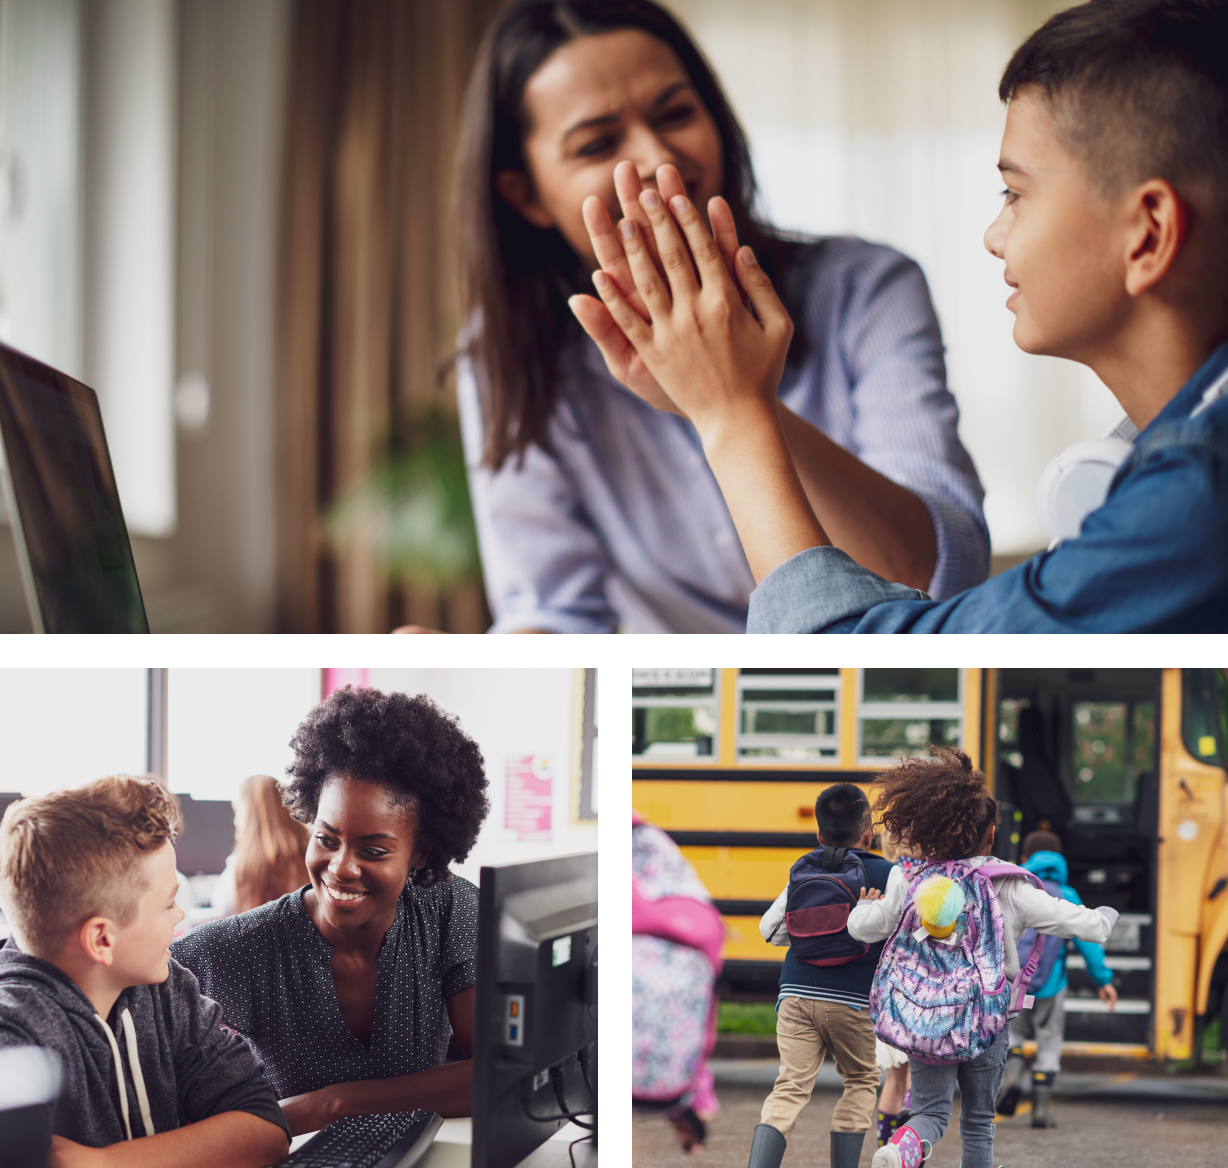 A group of three photographs: one shows a mother and her son high-fiving in front of a laptop, another shows a student and his teacher smiling at each other in front of a school computer, and the last one shows a group of children running excitedly toward a school bus.